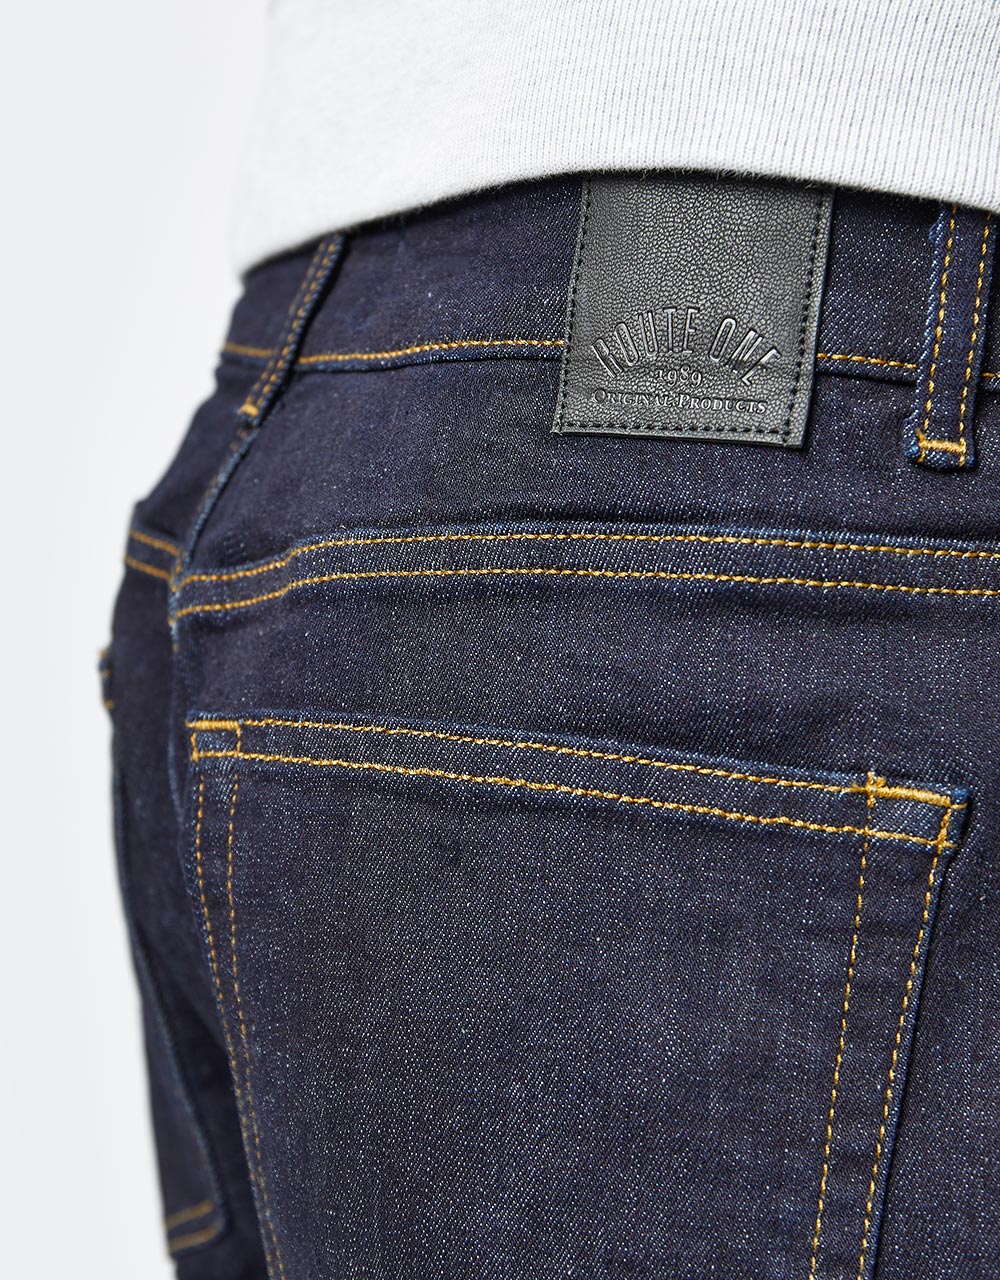 Route One Baggy Denim Jeans - Raw